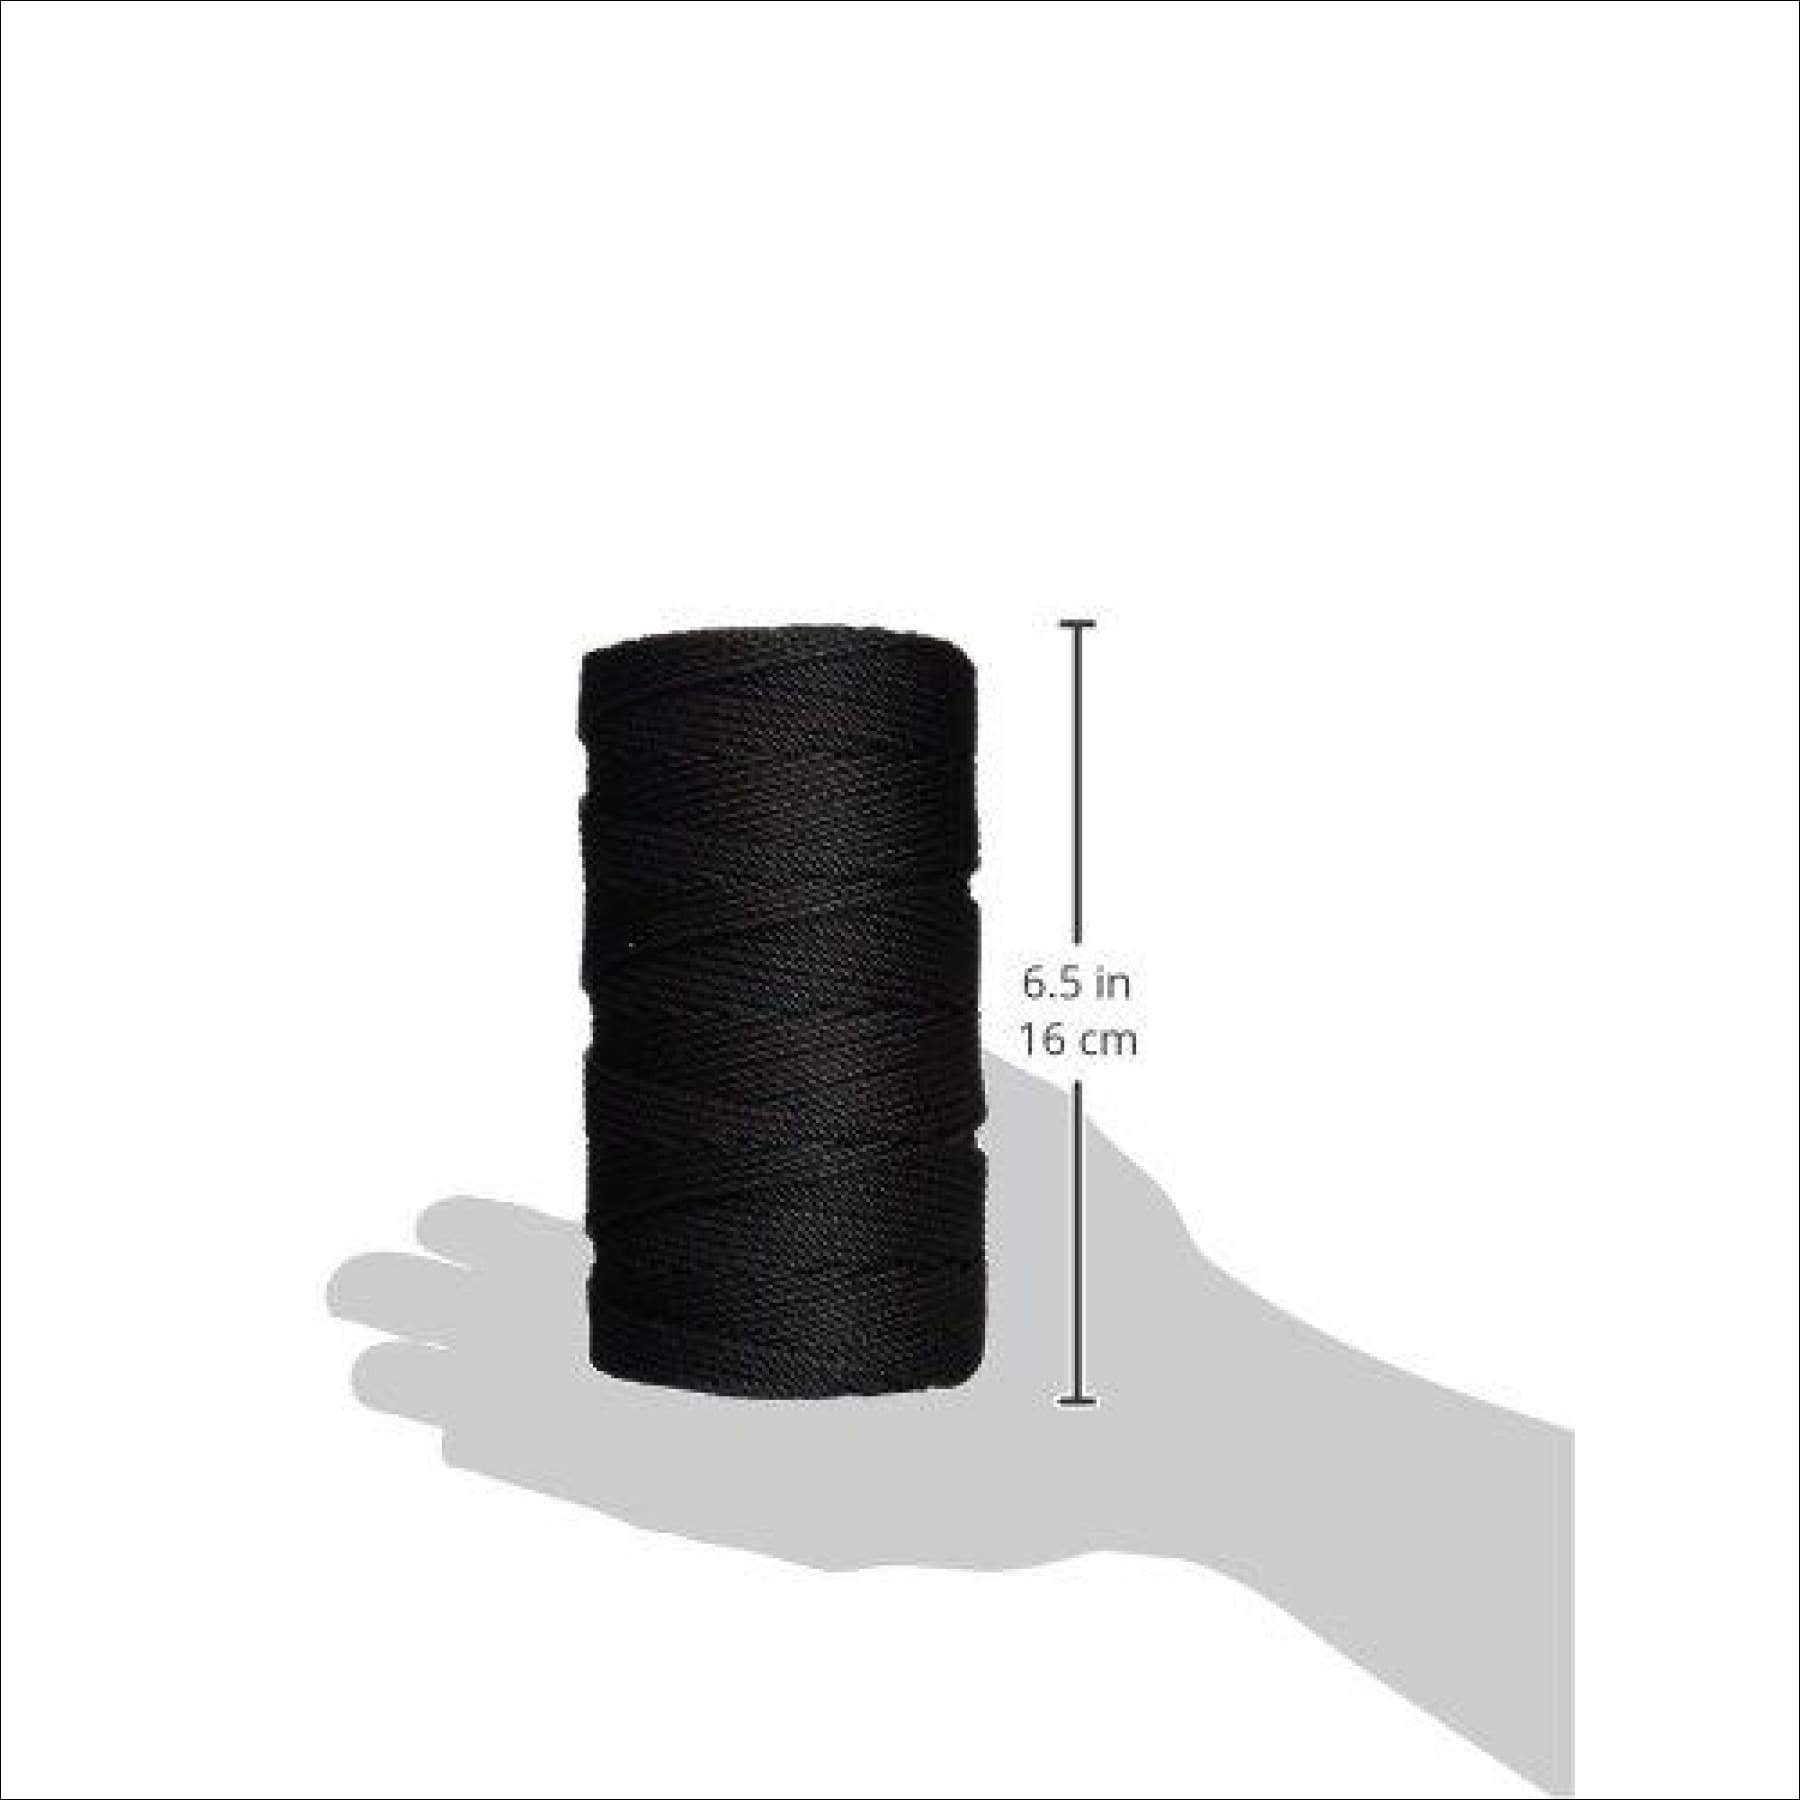 Details about    Tarred Bank Line Heavy Duty 100% Nylon Twine for Fishing 1 lb #36 Twisted